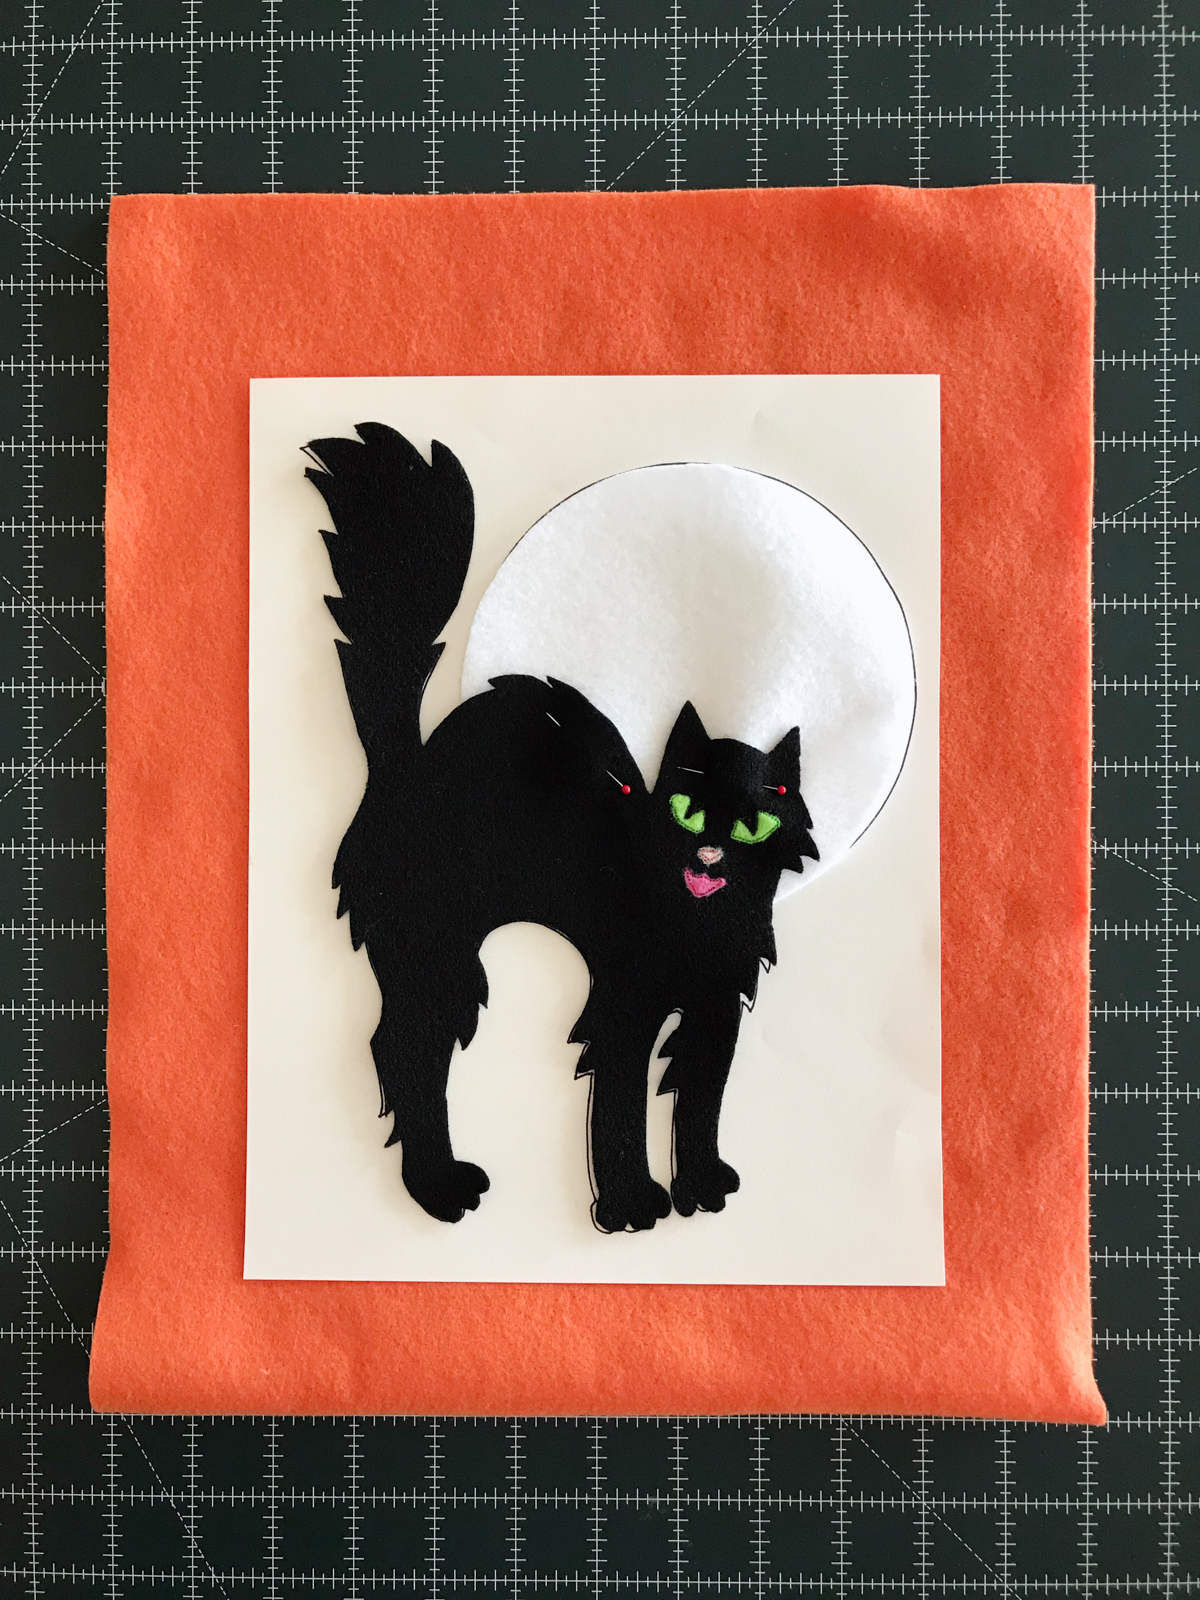 Halloween Treat Bag Tutorial- center the cat and moon applique